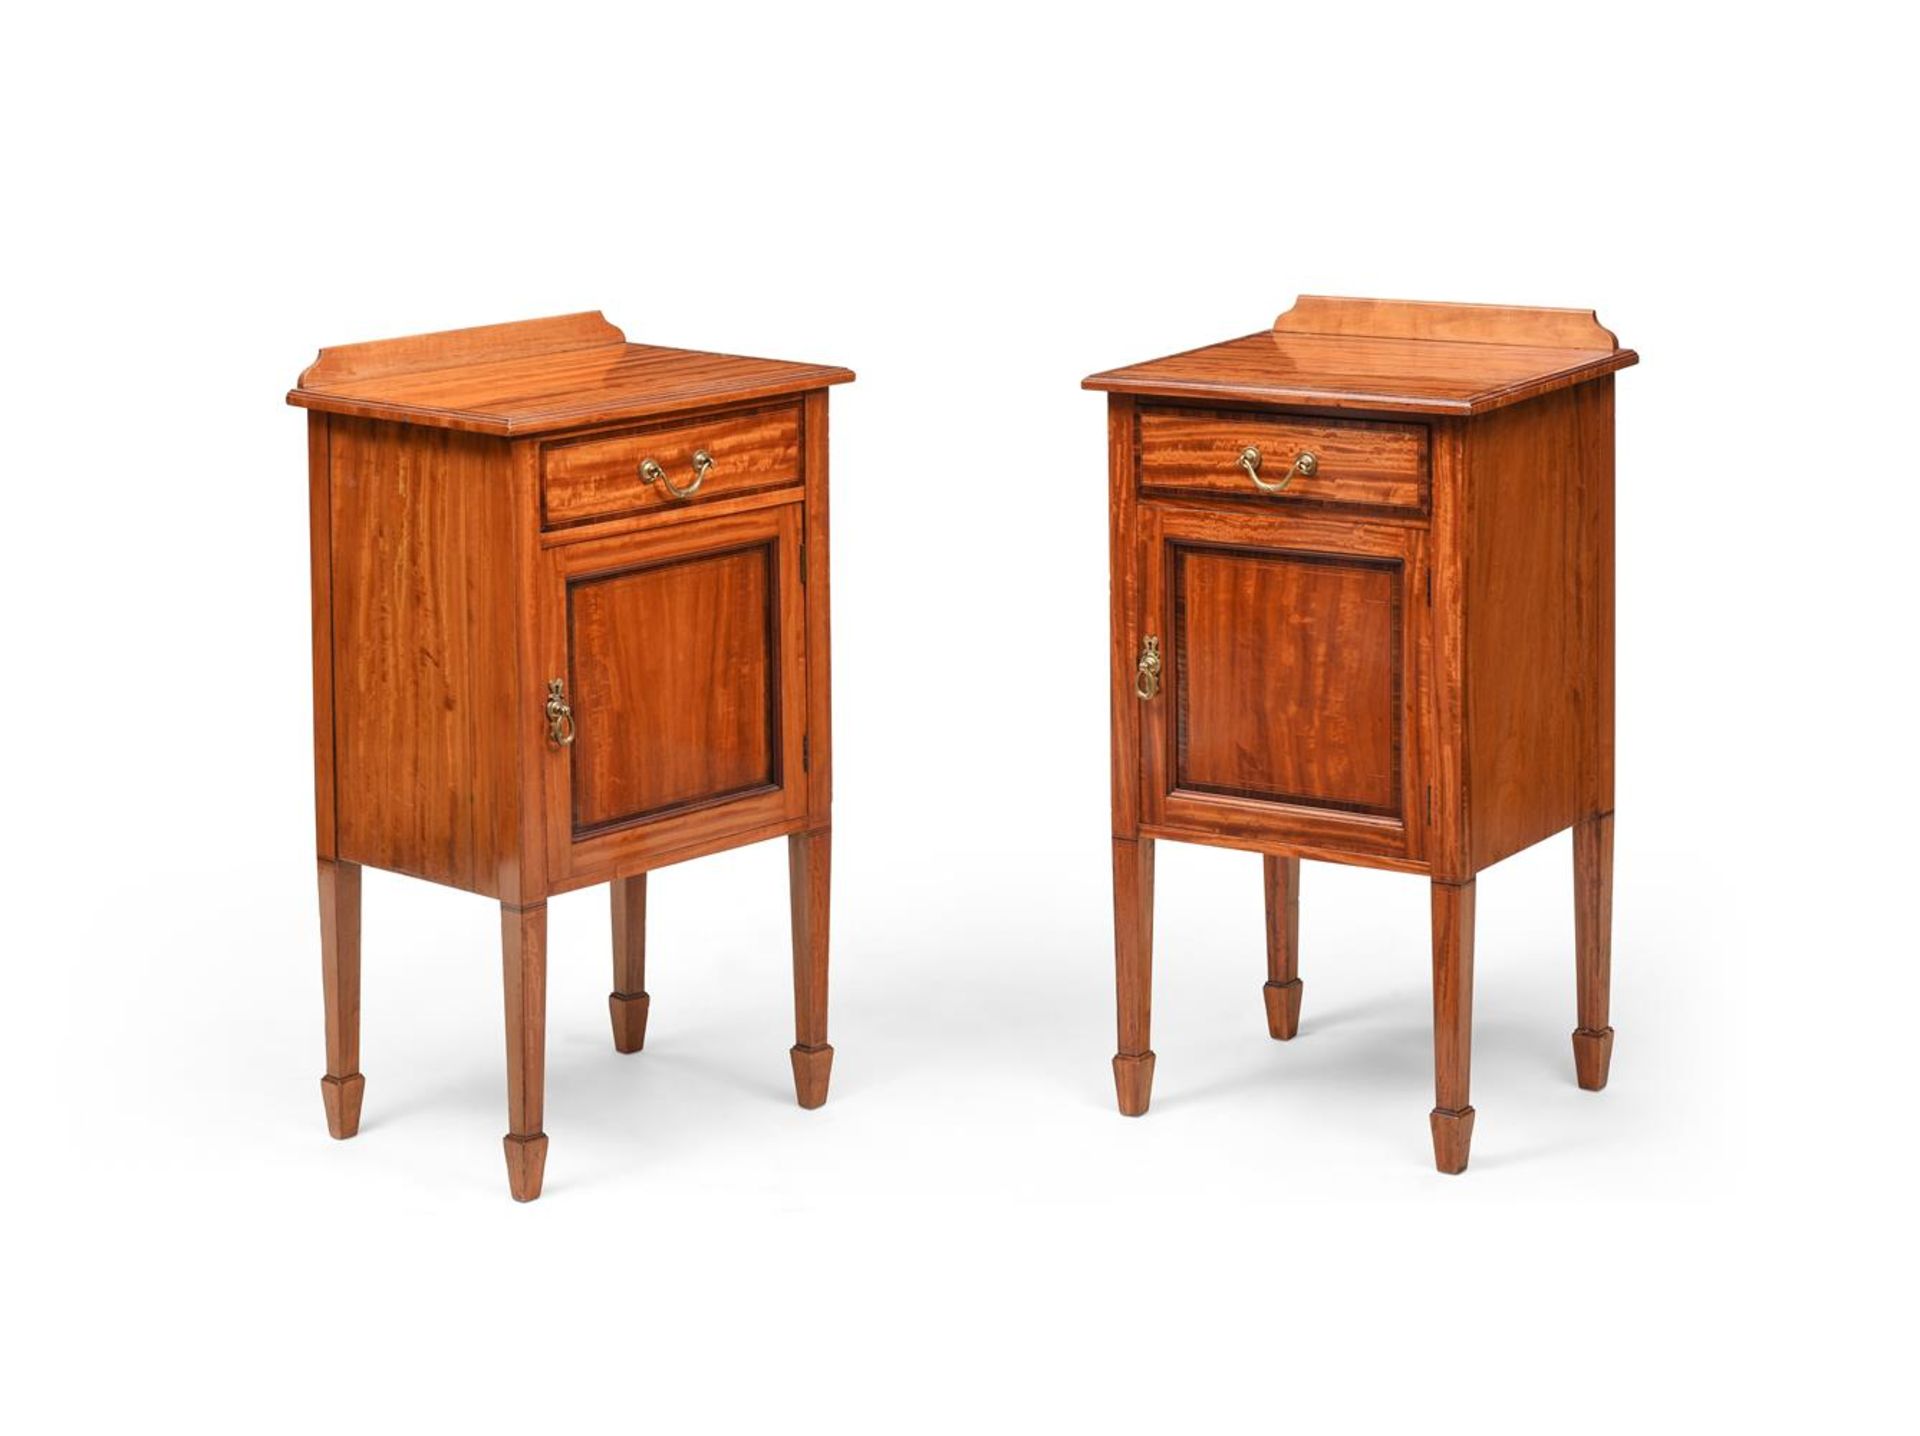 Y A PAIR OF VICTORIAN SATINWOOD AND KINGWOOD BANDED BEDSIDE CUPBOARDS, LATE 19TH CENTURY